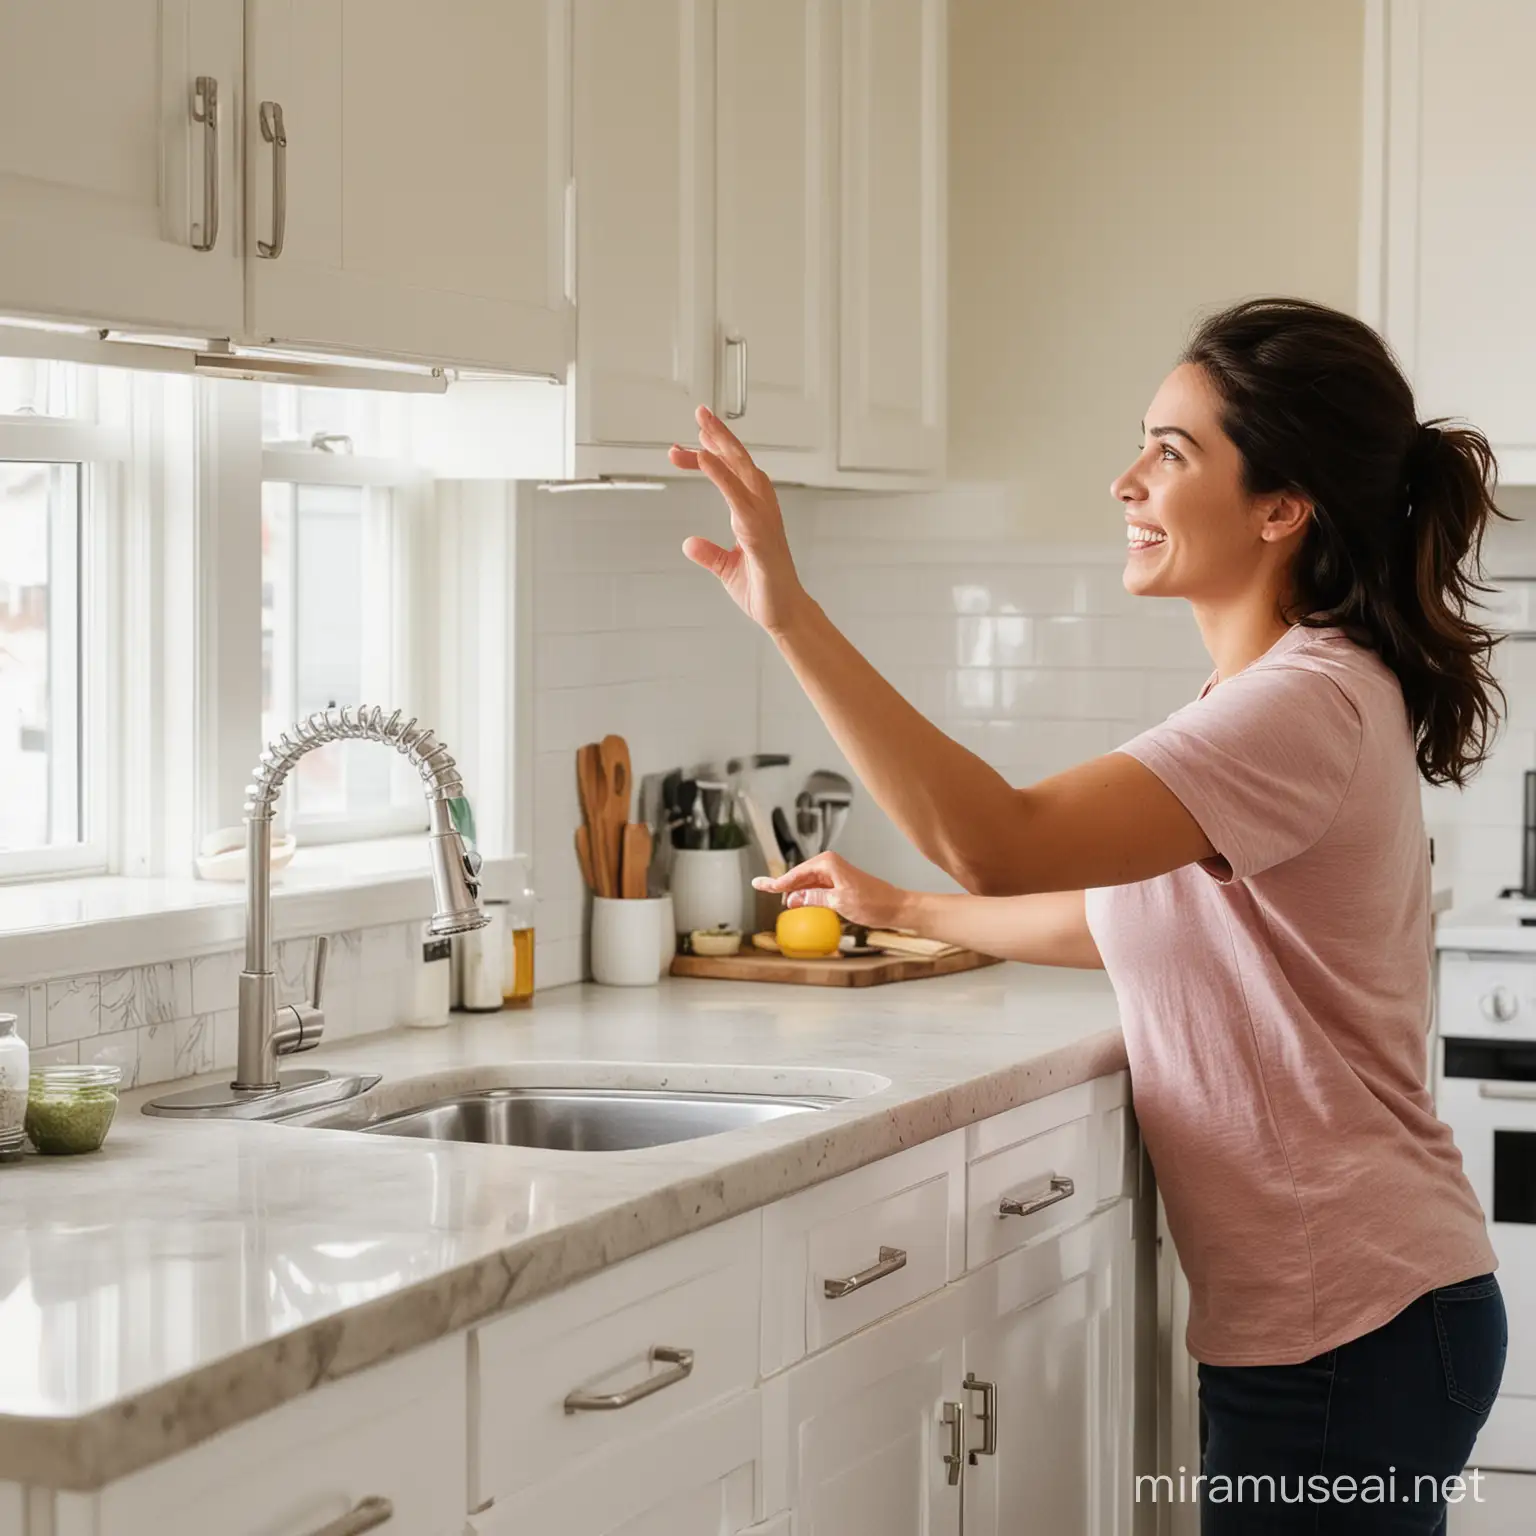 Woman Reaching for Utensils on Kitchen Counter